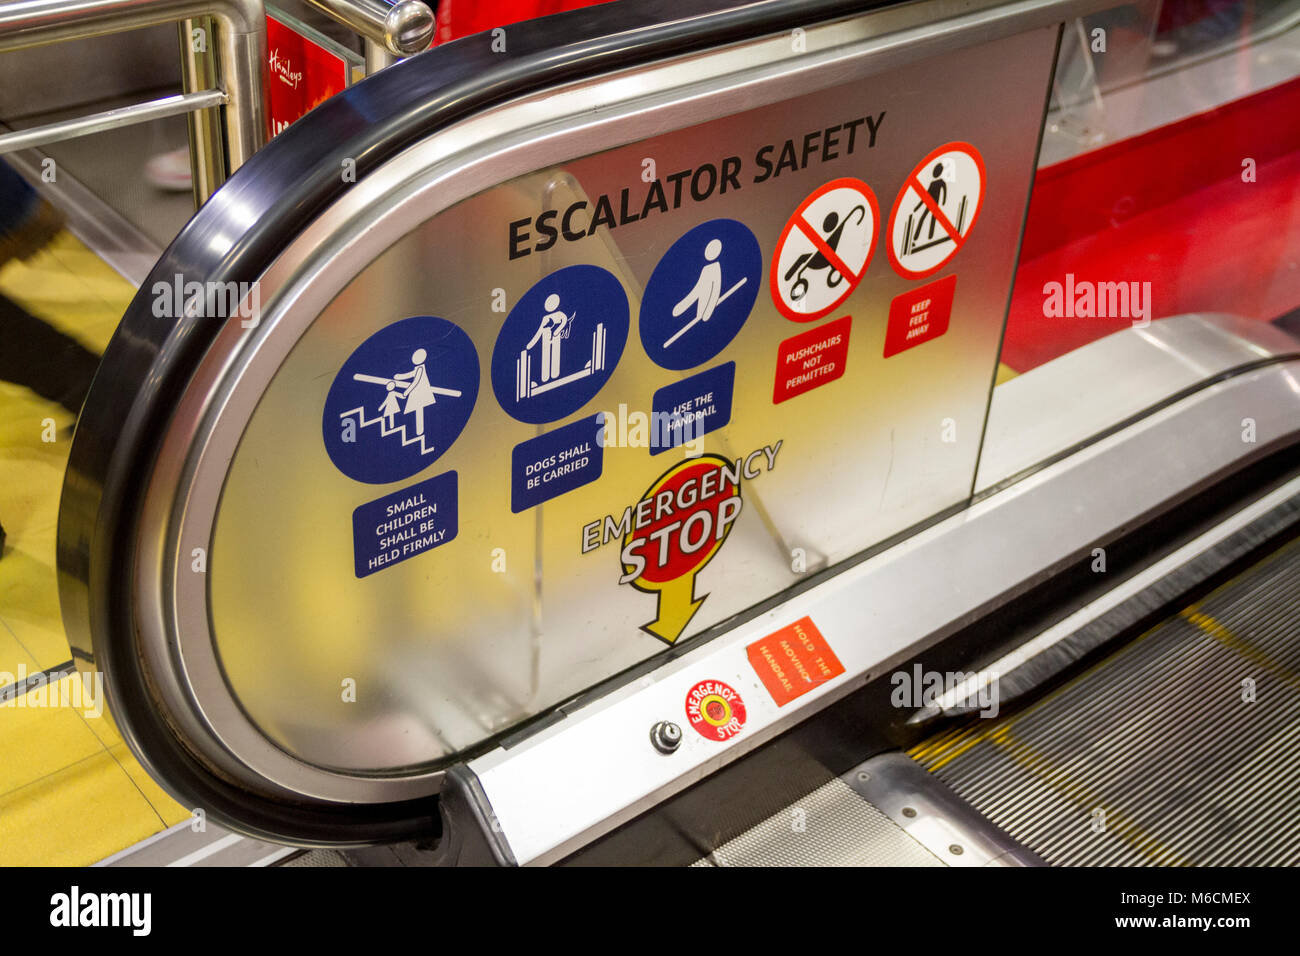 Security, Safety signs on an escalator in a shop, London UK Stock Photo